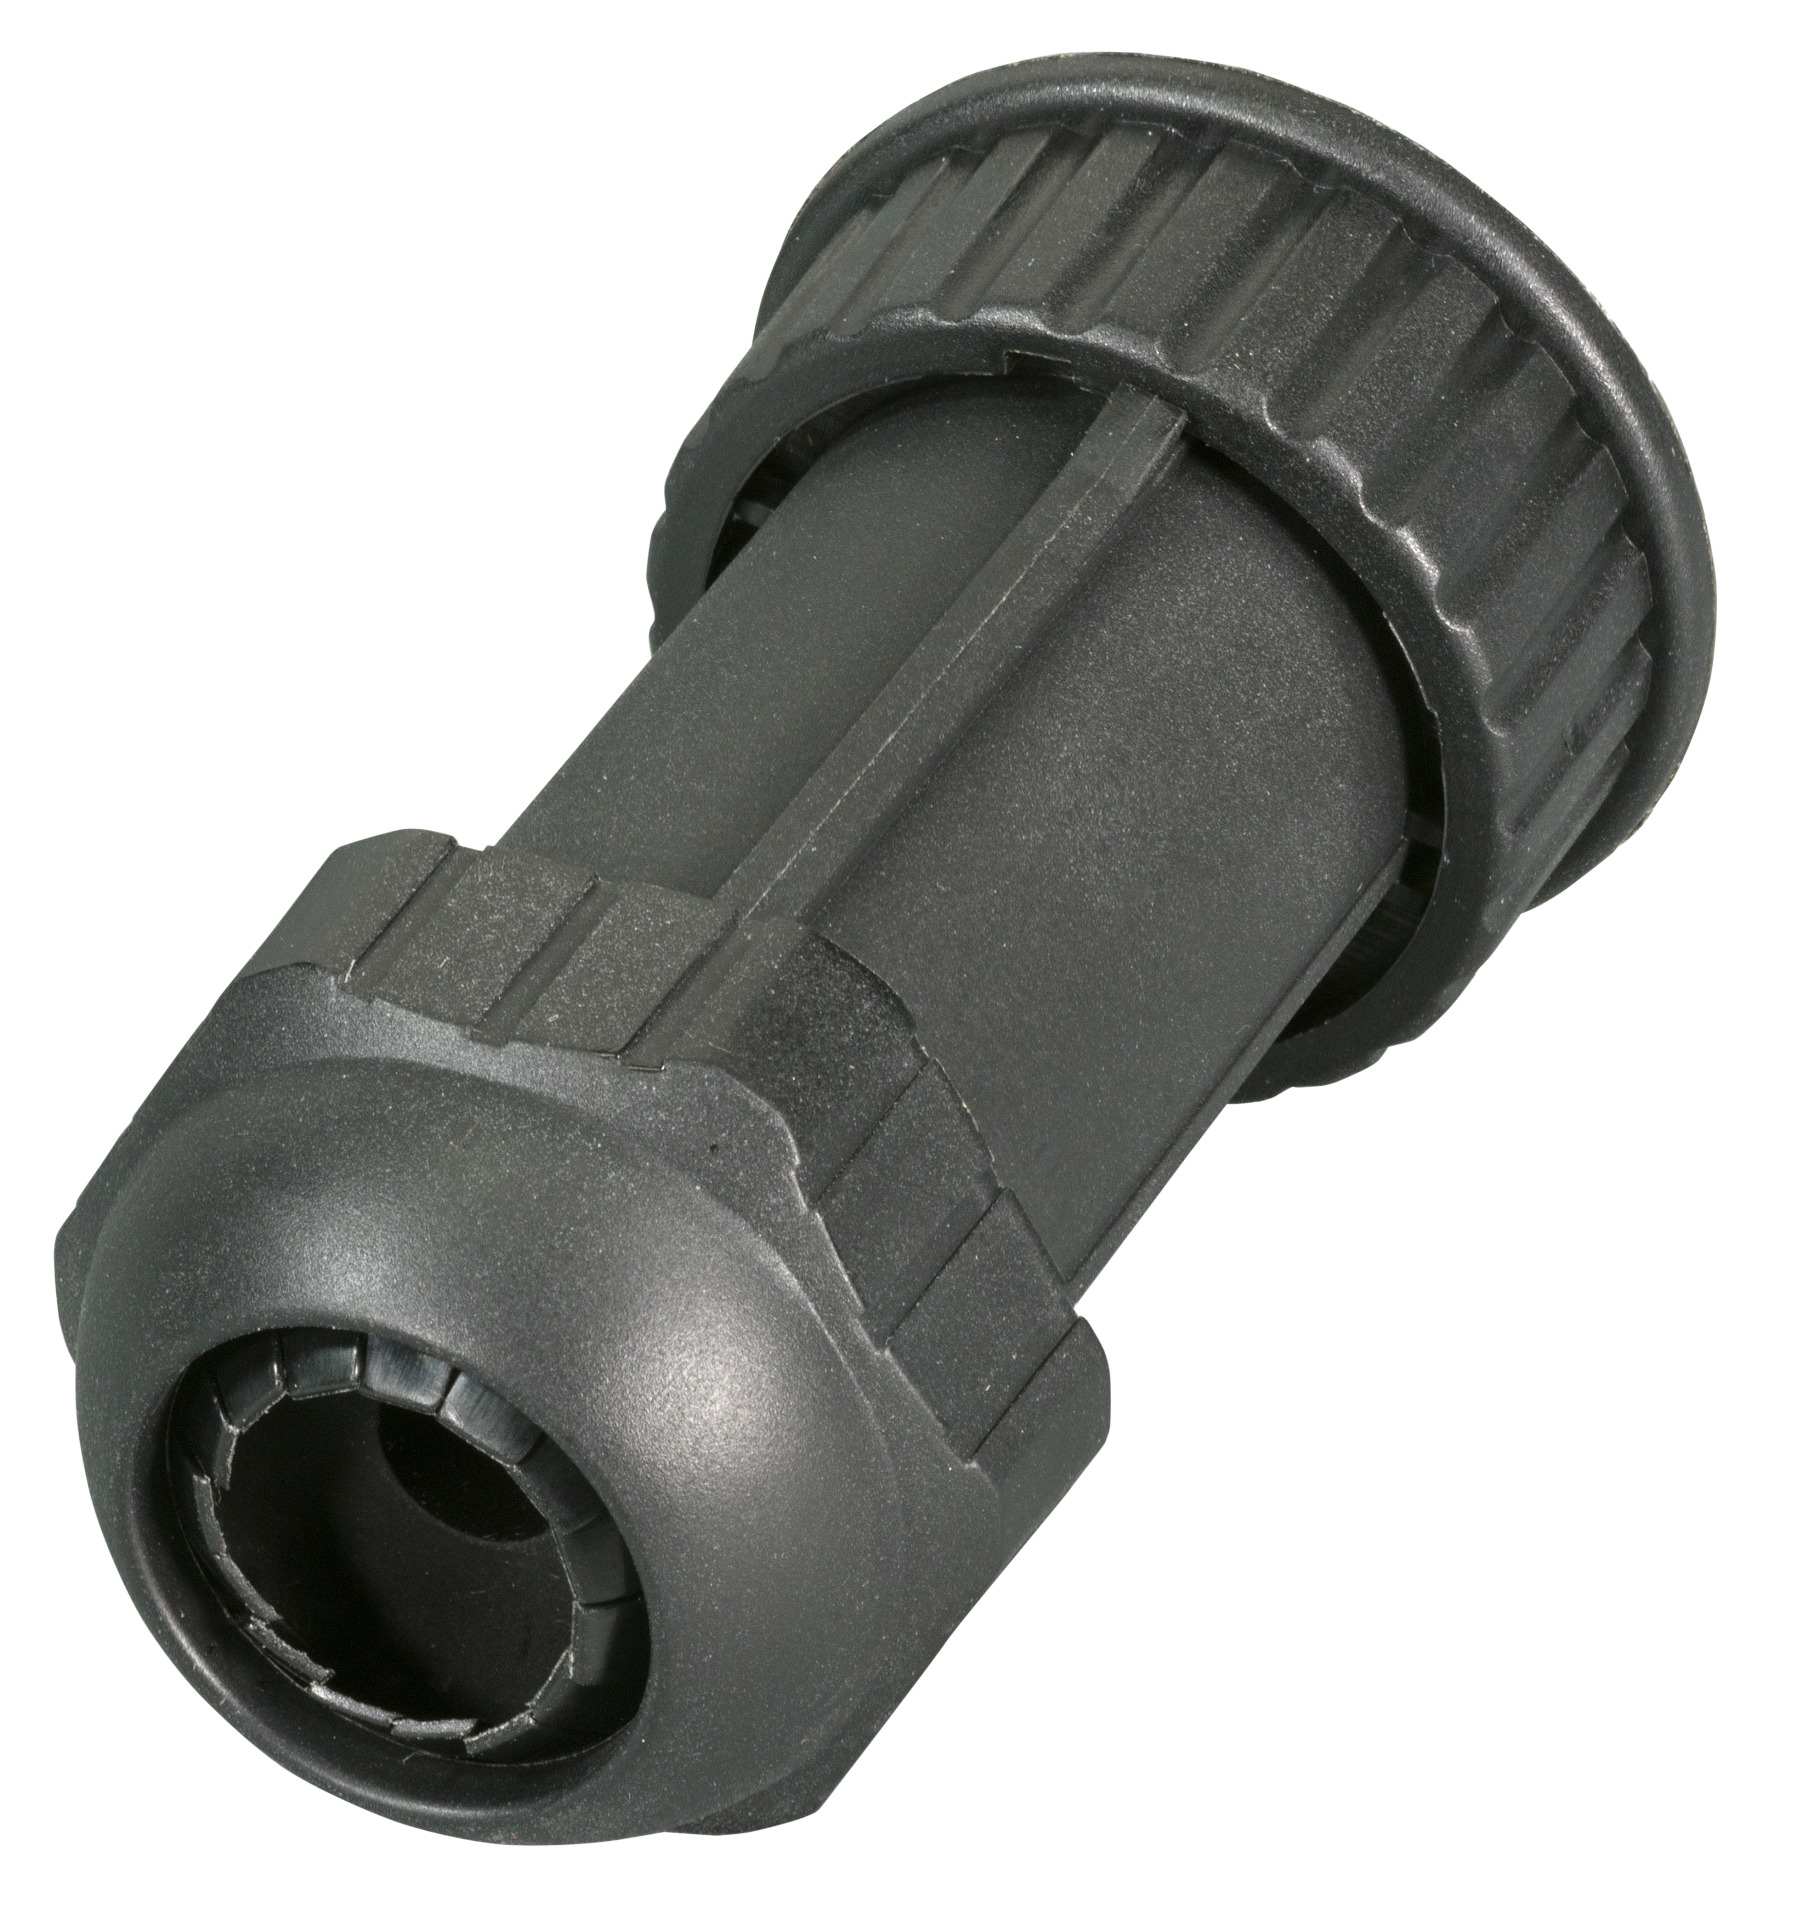 IP68 Cable gland for RJ45 field assembly plugs, sealing for 4.5-6.5mm OD